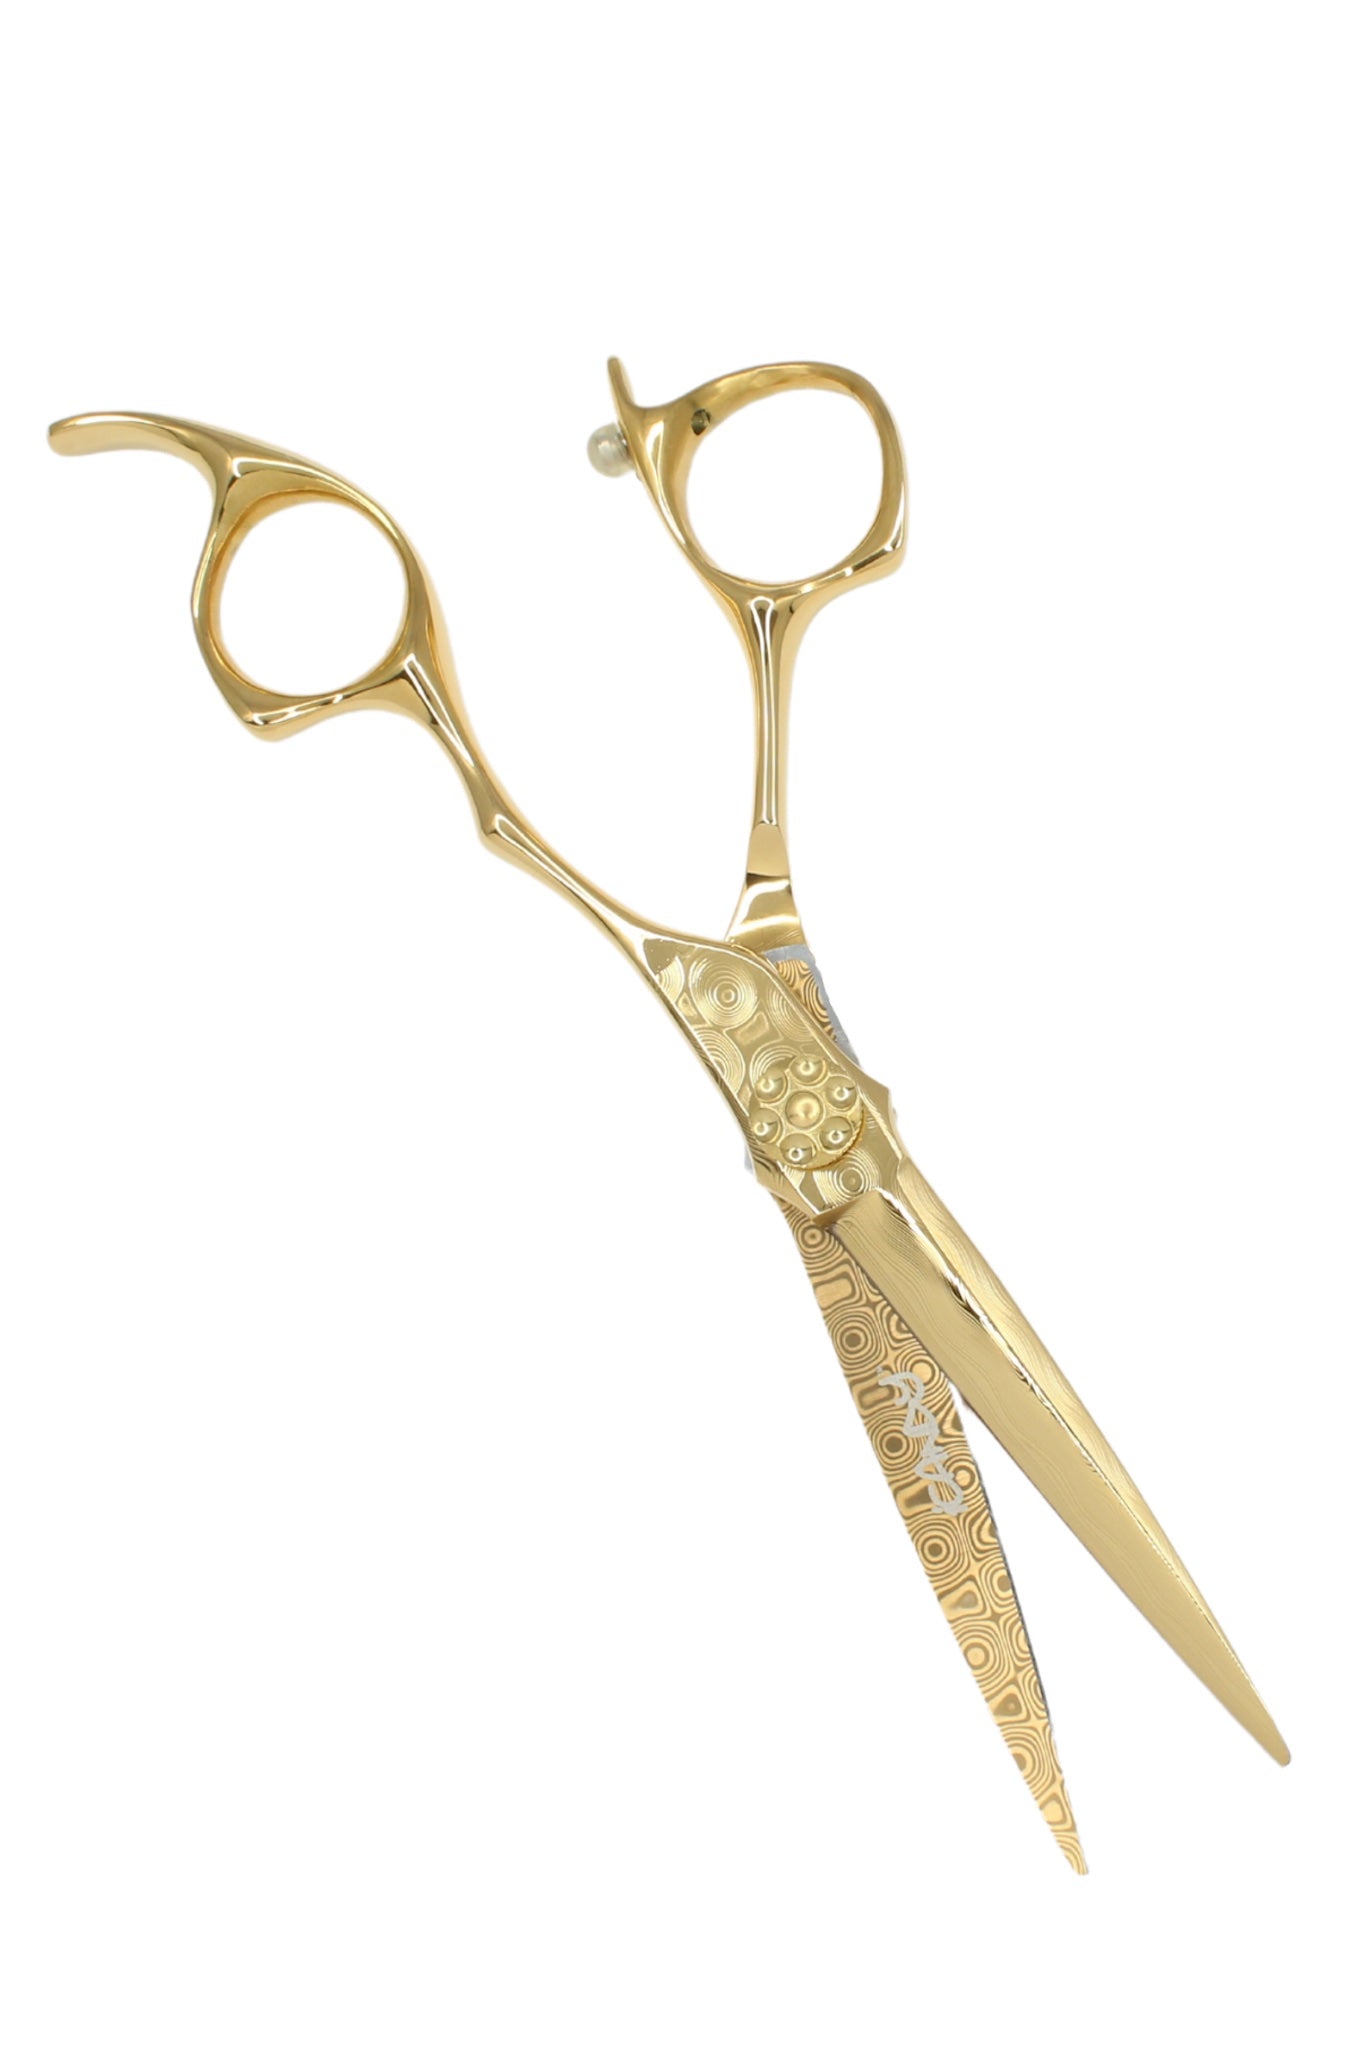 iCandy DAMASCUS ALL STAR Yellow Gold Scissor 6.0" Primary Pic1